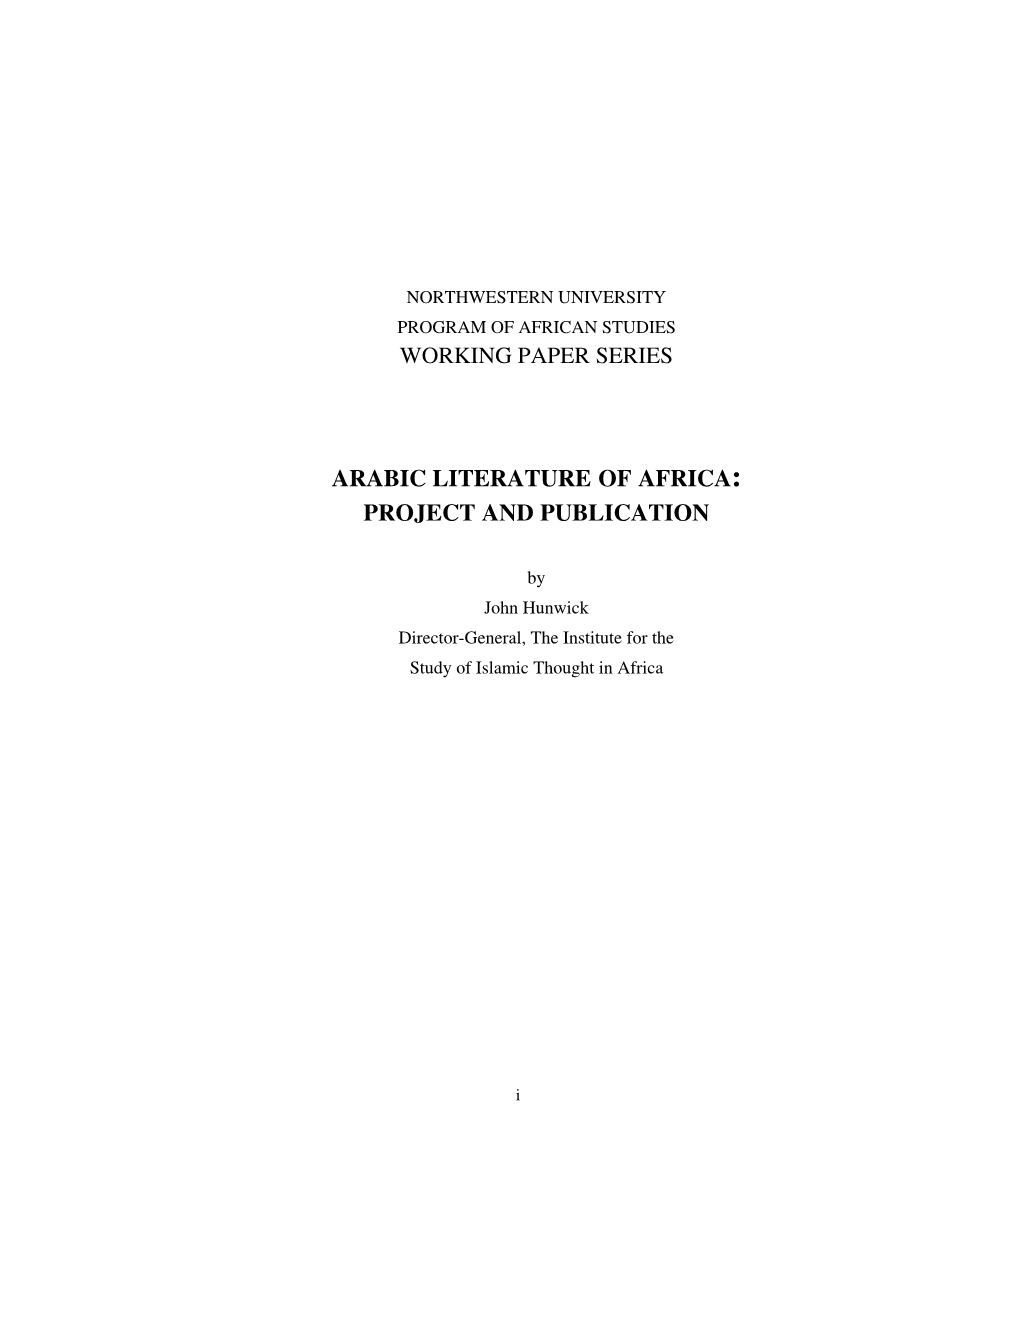 Arabic Literature of Africa: Project and Publication